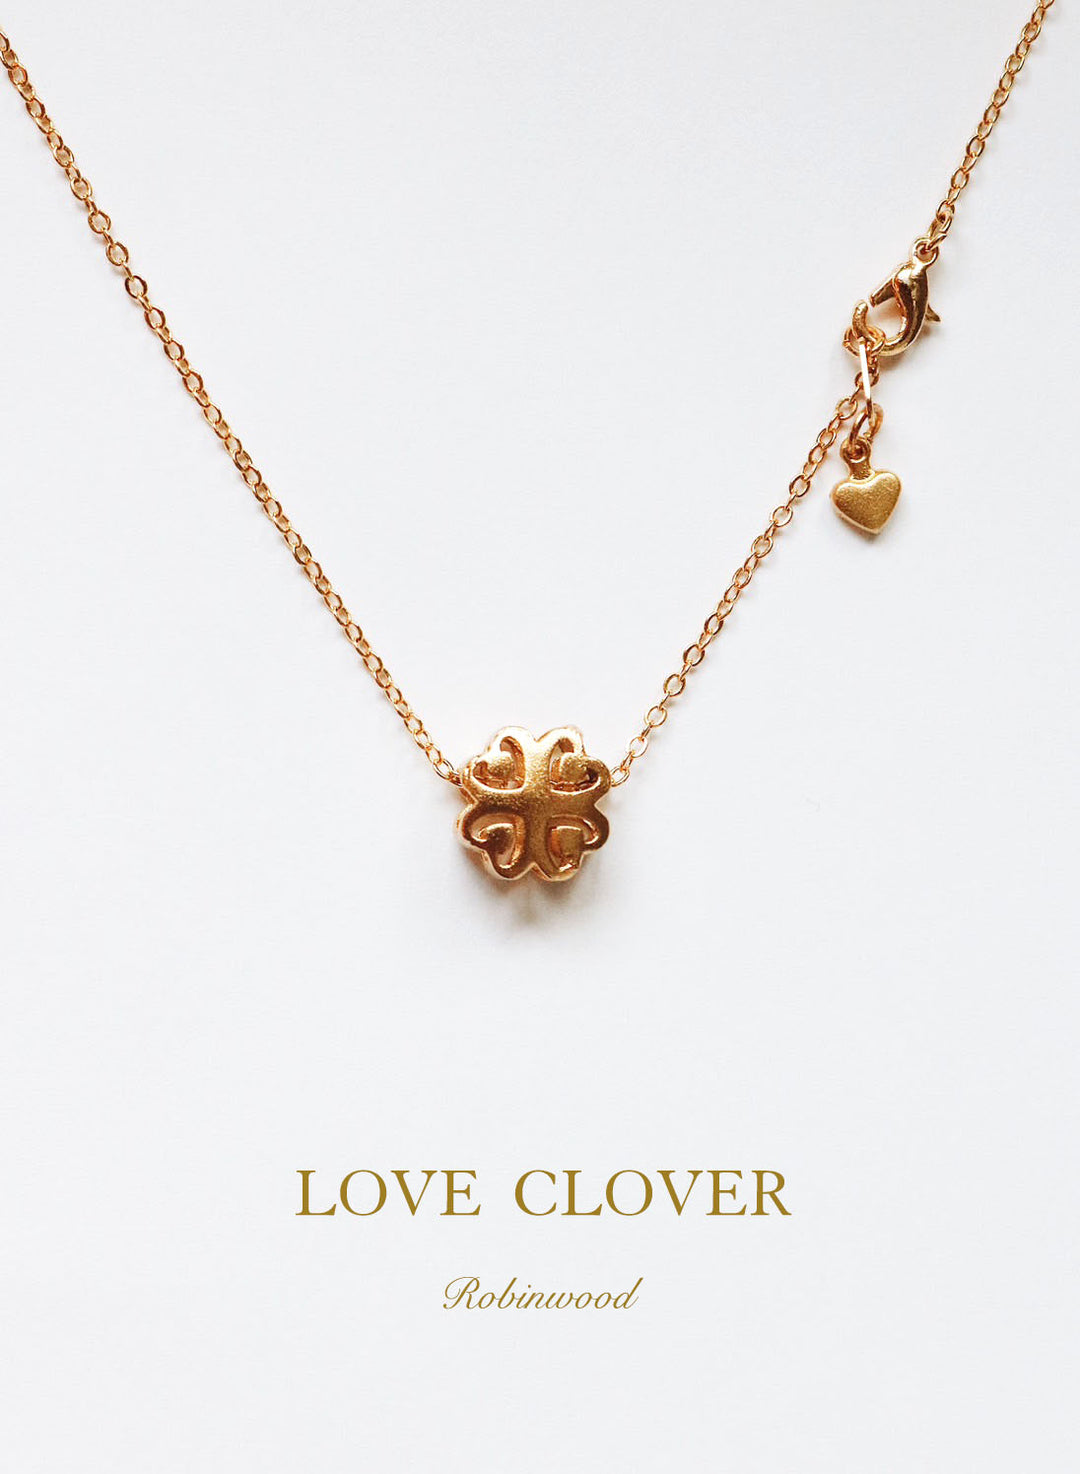 Limited Collection's " LOVE CLOVER " Necklace Design, 14 K Gold, Robinwood